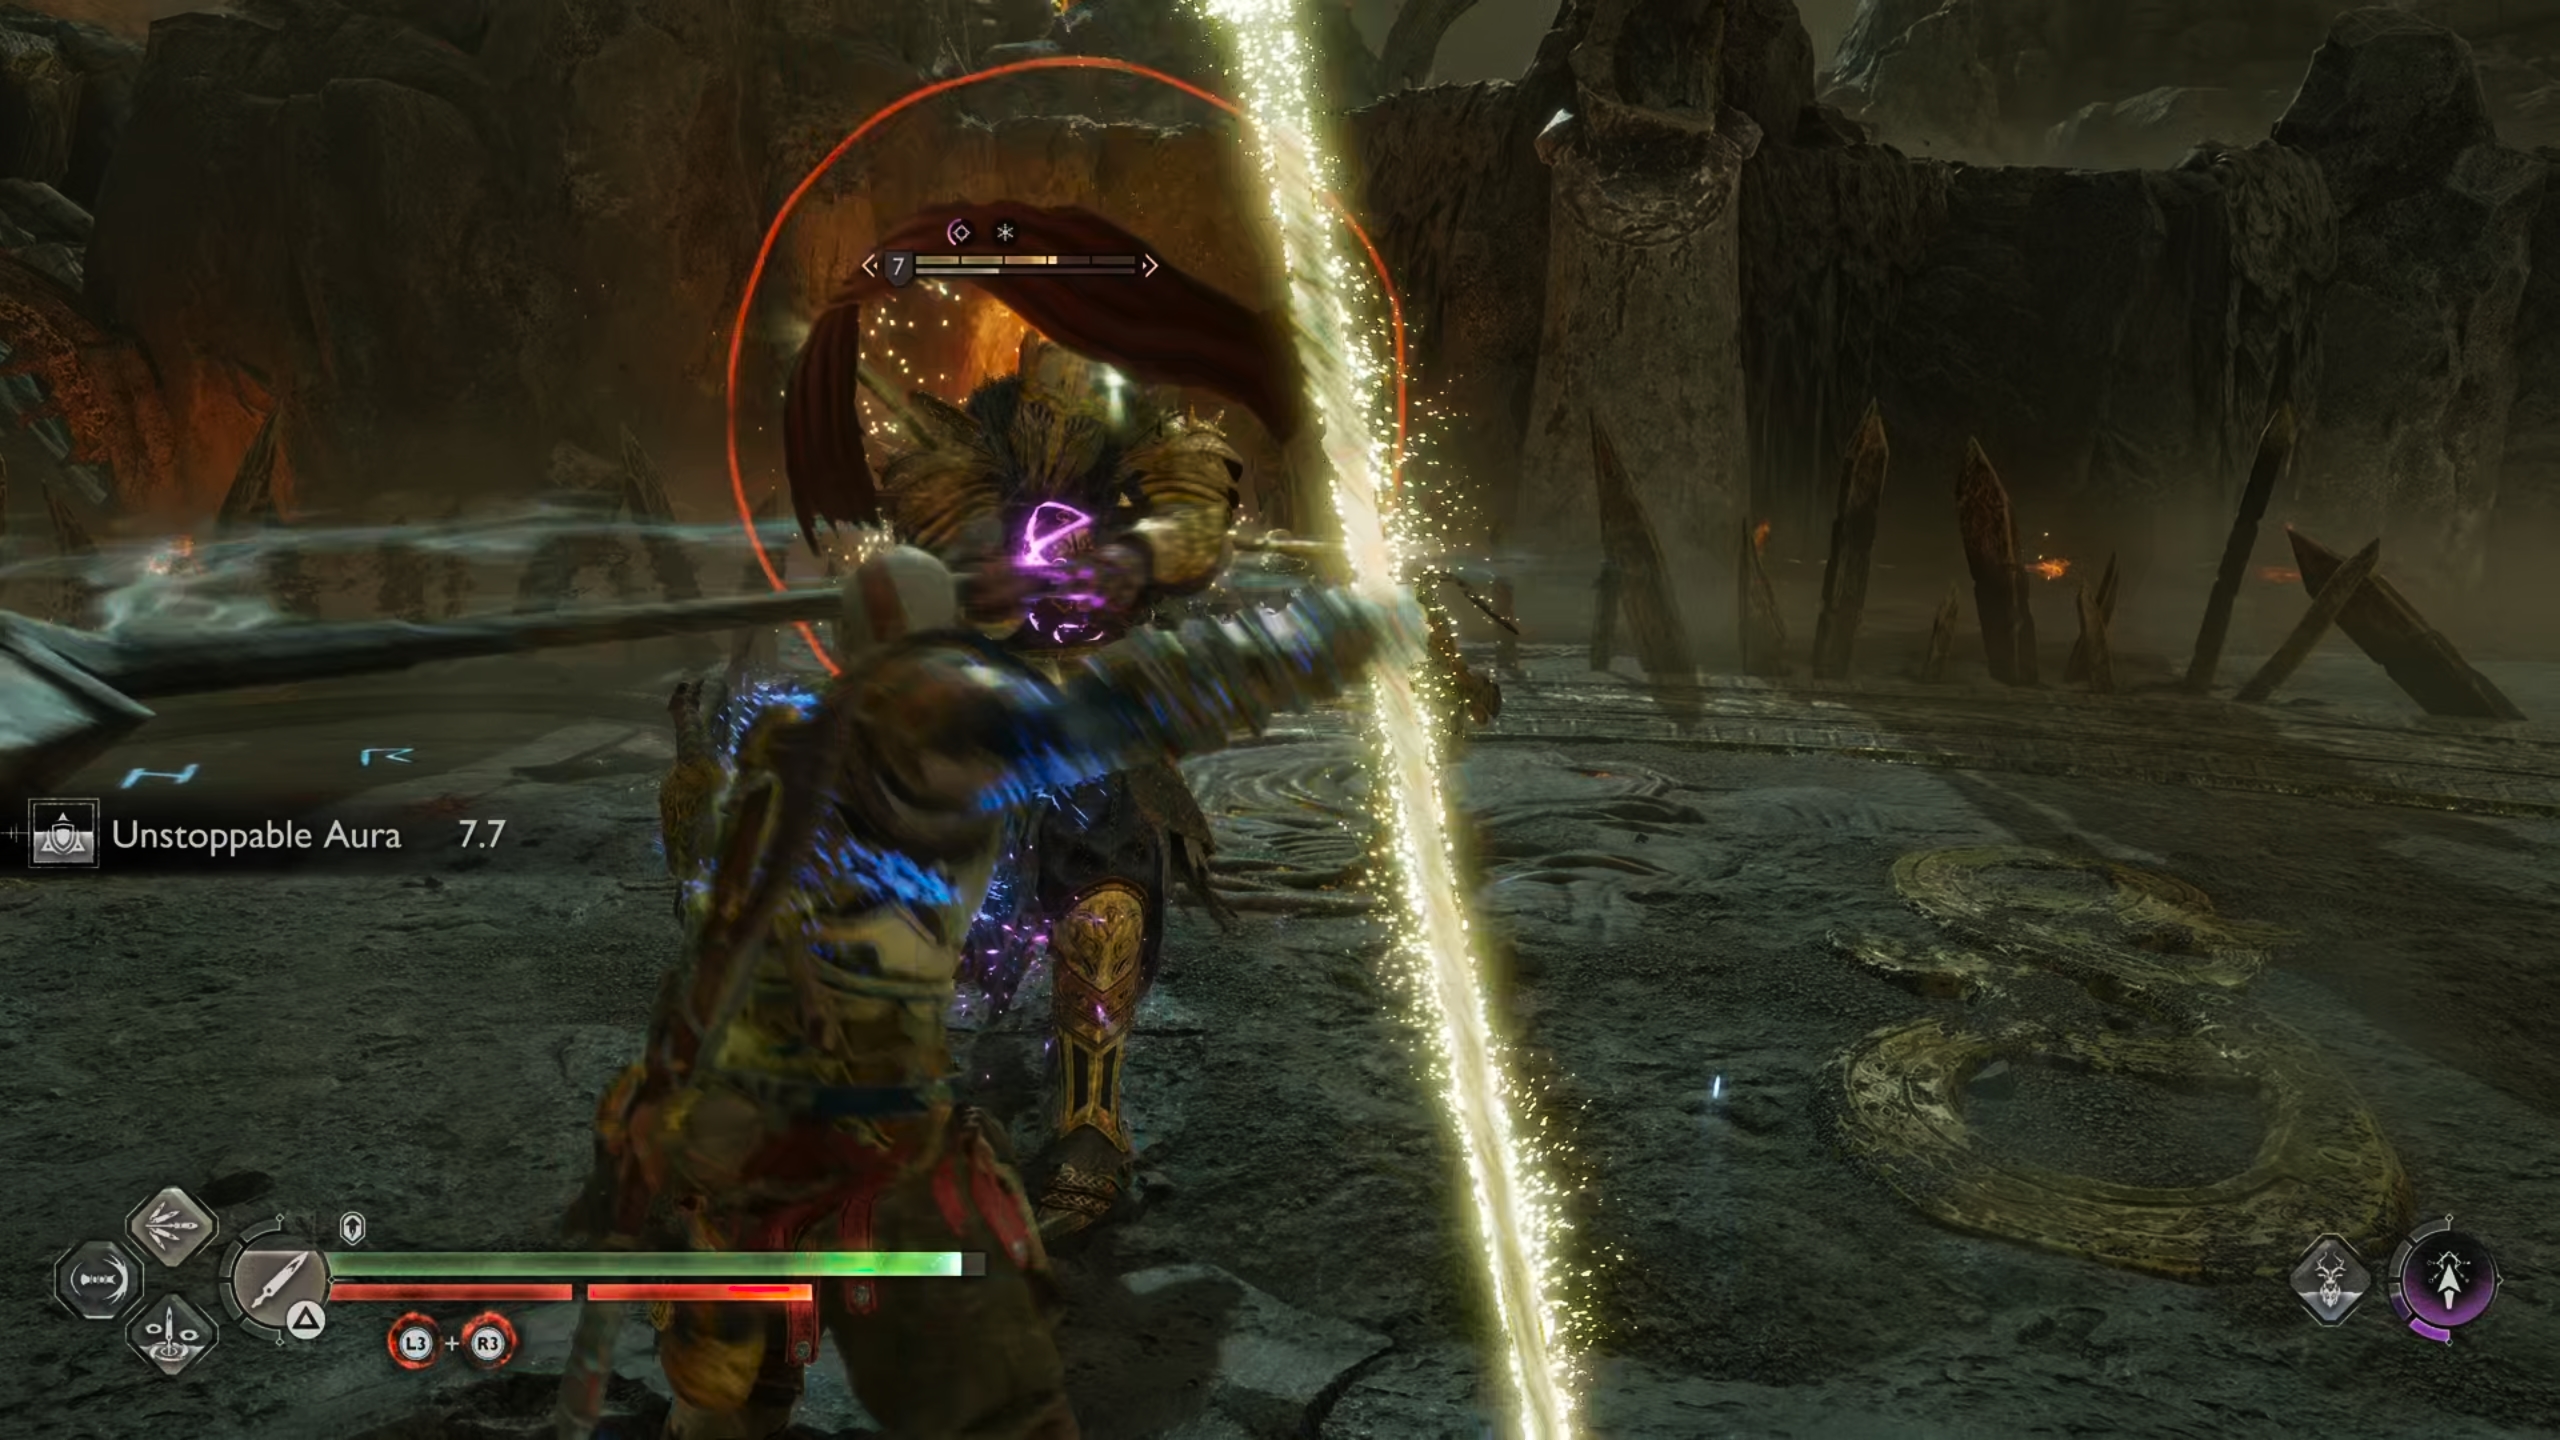 You need to dodge red ring attacks, since they can't be blocked or parried.